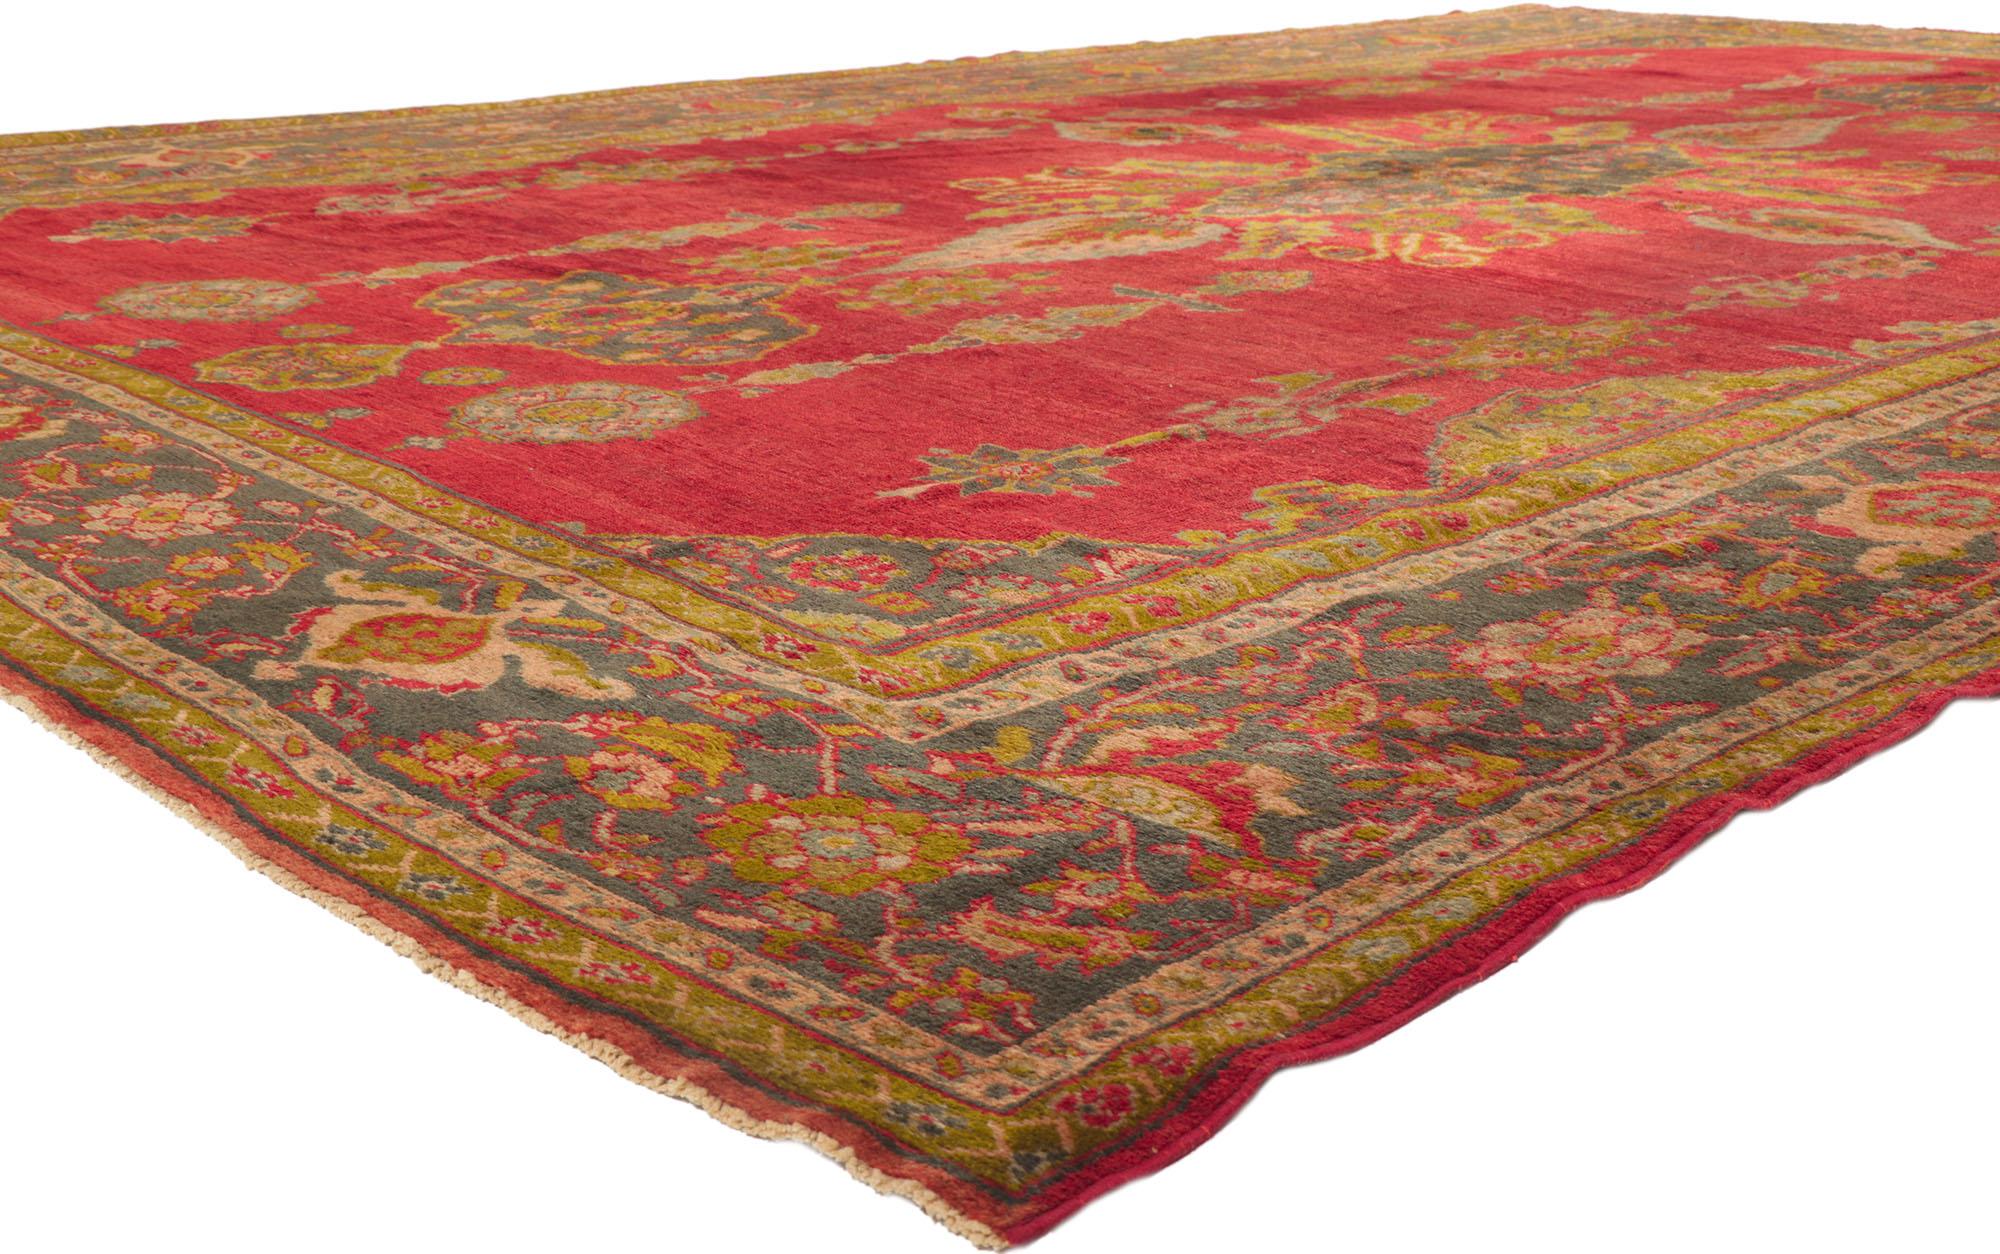 53766 large oversized red antique Persian Sultanabad rug with Jacobean Style 11'04 x 16'11. With its striking appeal and saturated red color palette, this hand-knotted wool antique Persian Sultanabad rug appears like a sumptuous Italian velvet,